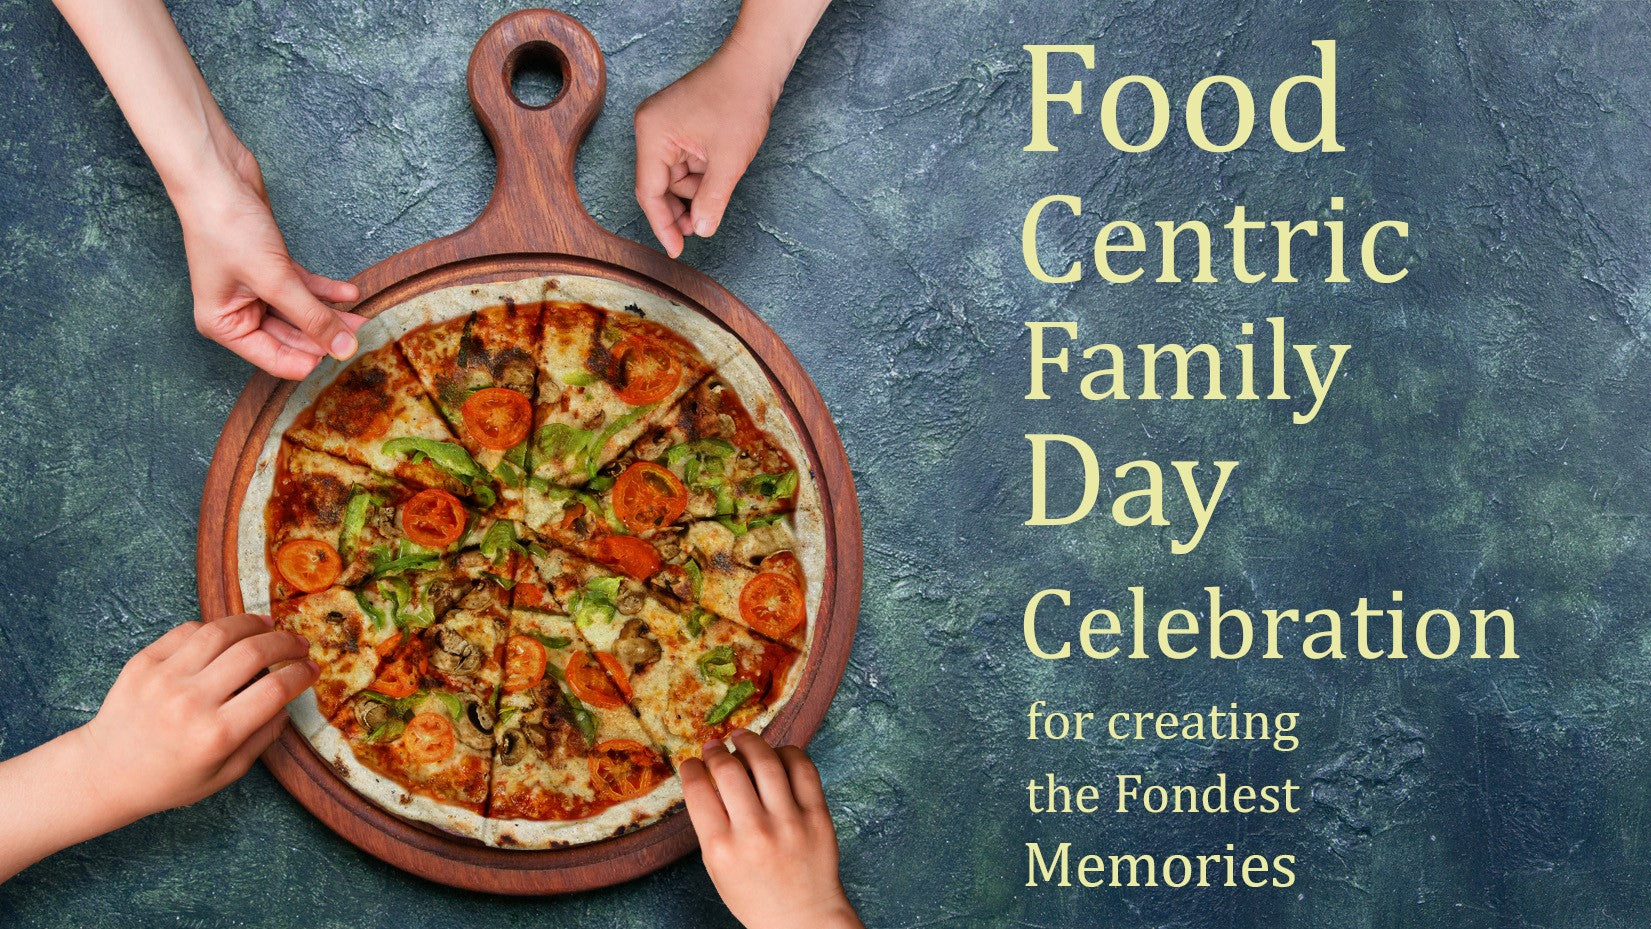 Let’s celebrate International Family Day in the most delicious way!